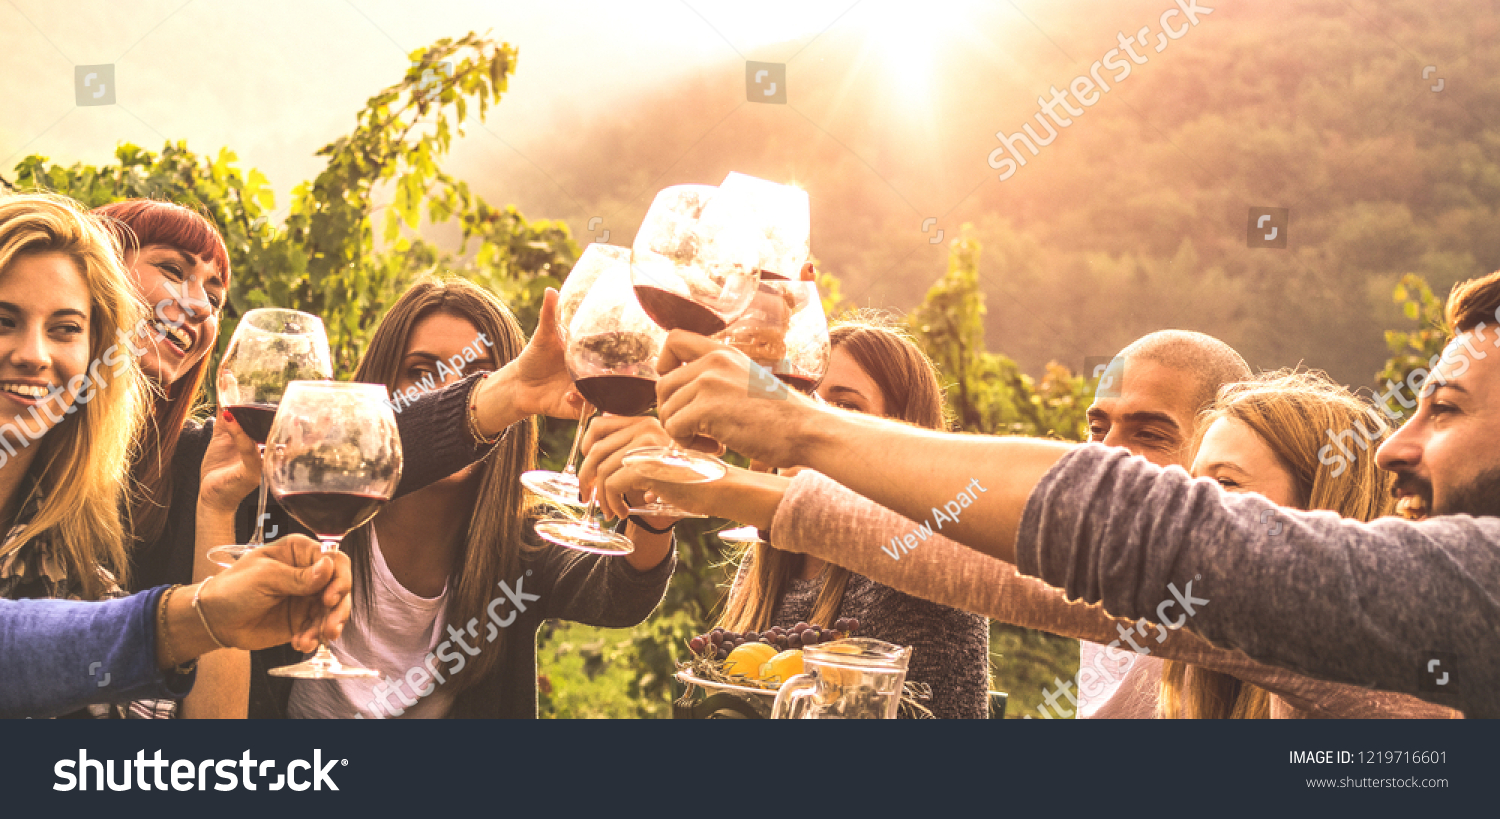 Young friends having fun outdoor - Happy people enjoying harvest time together at farm house winery countryside - Youth friendship concept - Hand toasting red wine at pic nic in vineyard before sunset #1219716601